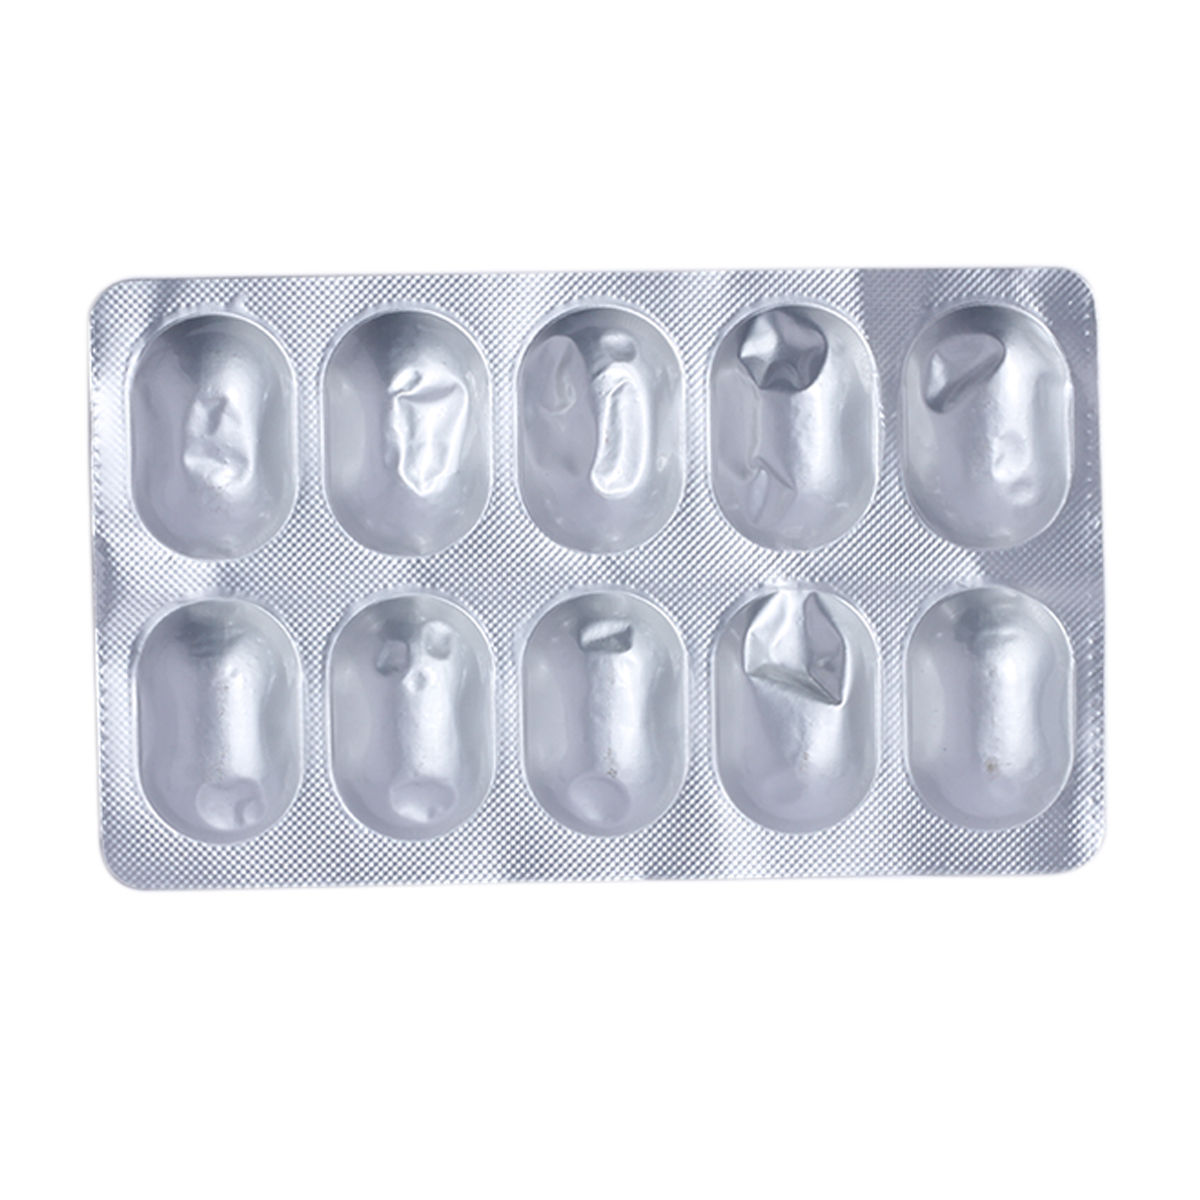 Athzol DSR Tablet 10's, Pack of 10 TabletS